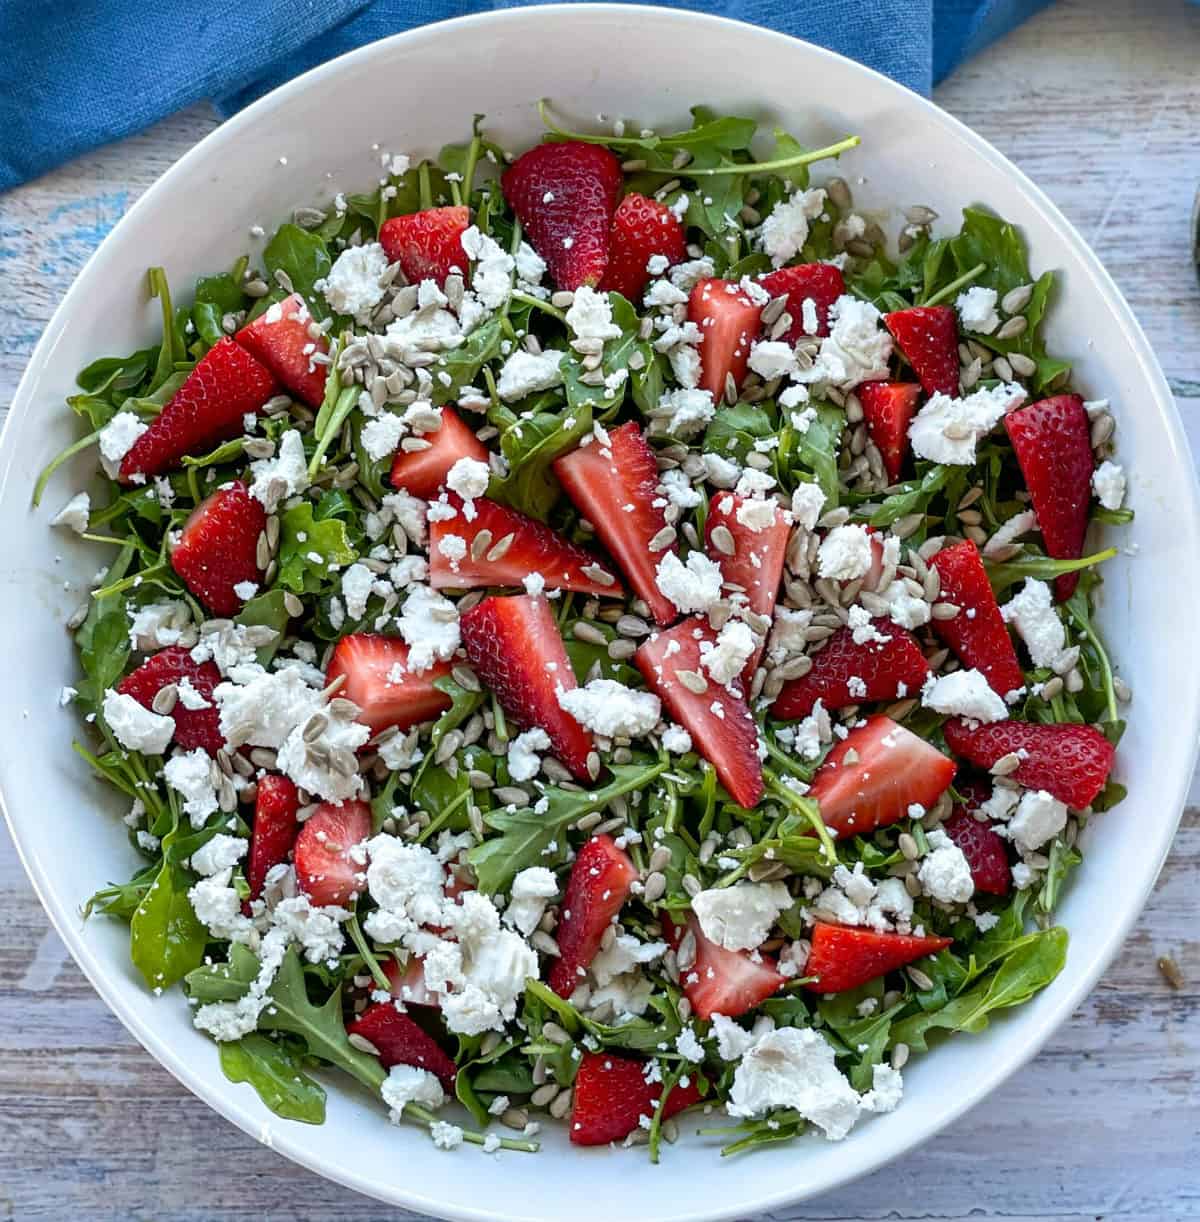 Rocket, Feta, Strawberries and sunflower seeds combined in a large white bowl